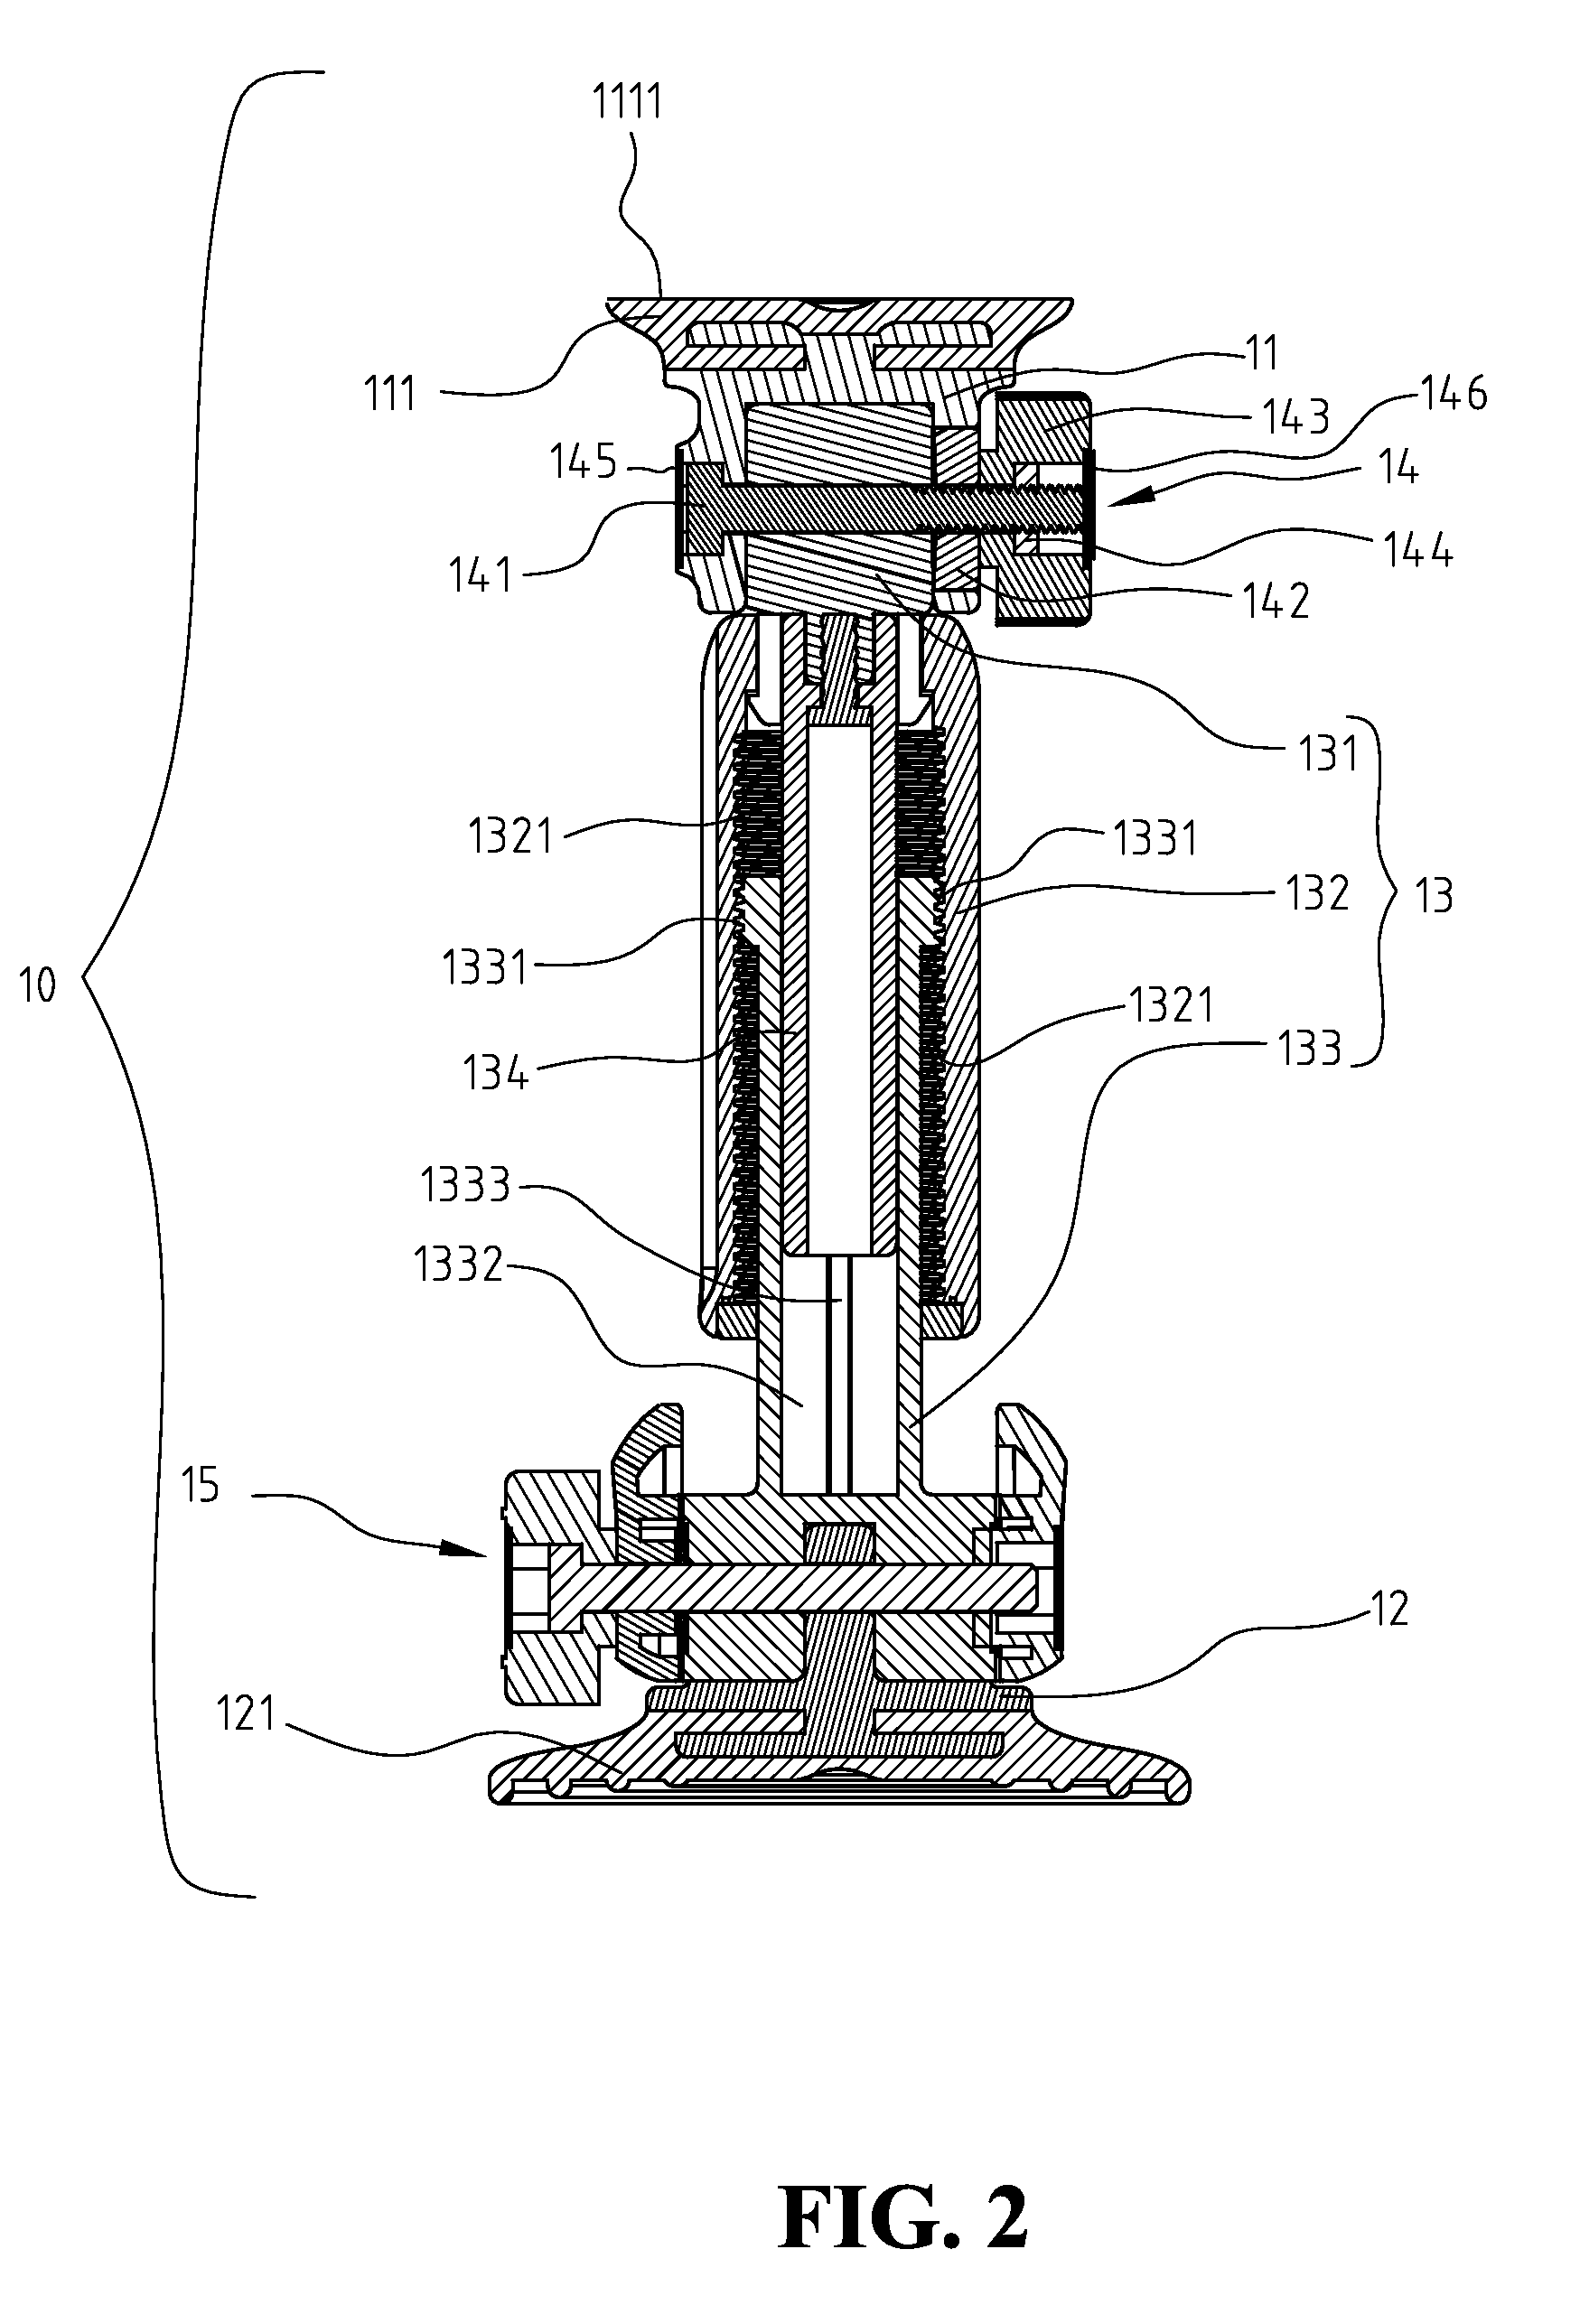 Support Connecting Apparatus For Using Inside Vehicles